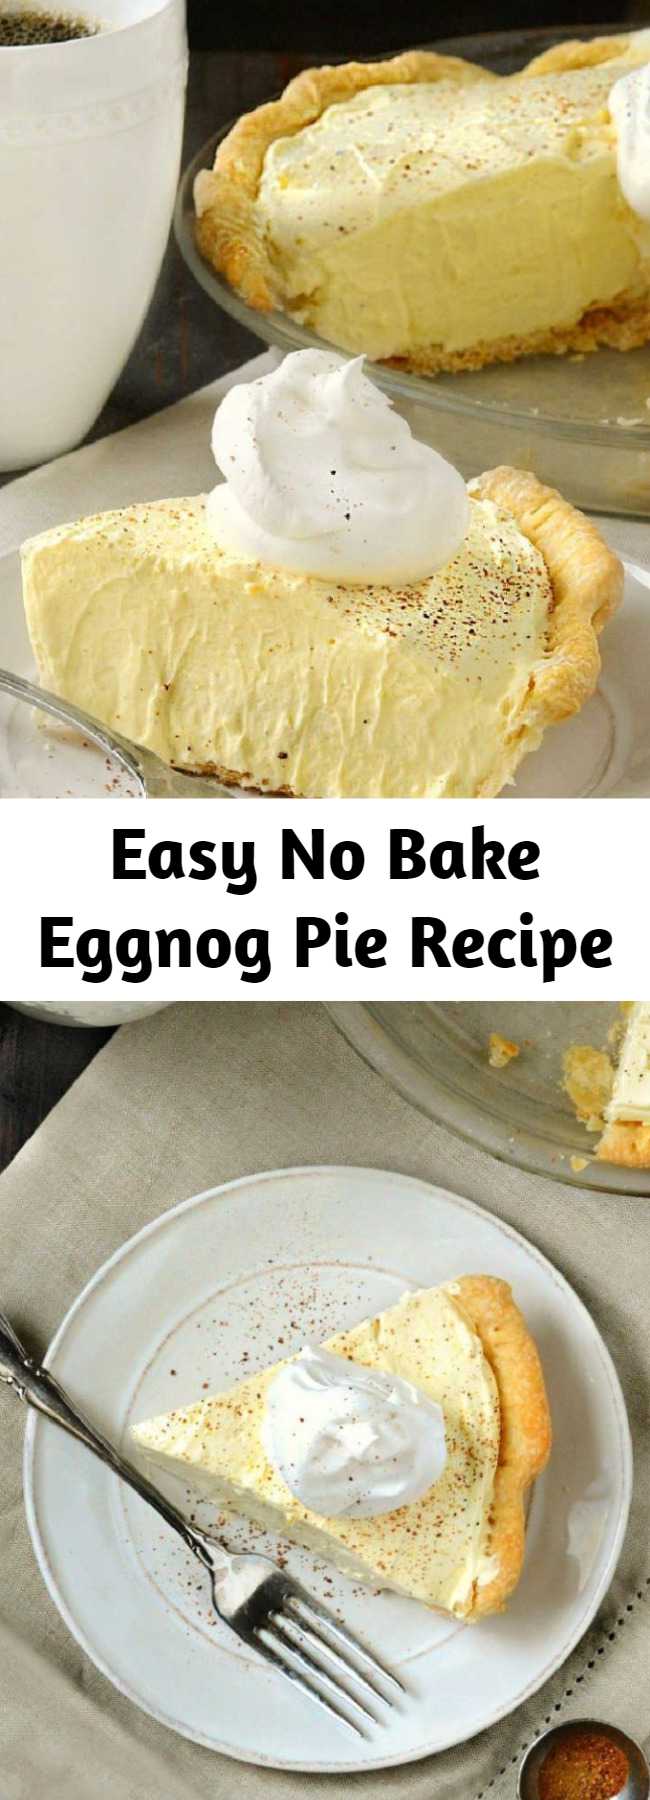 Easy No Bake Eggnog Pie Recipe - This easy no bake Eggnog Pie has won a permanent place on our Thanksgiving and Christmas dessert menus. It's light, fluffy and a family favorite!